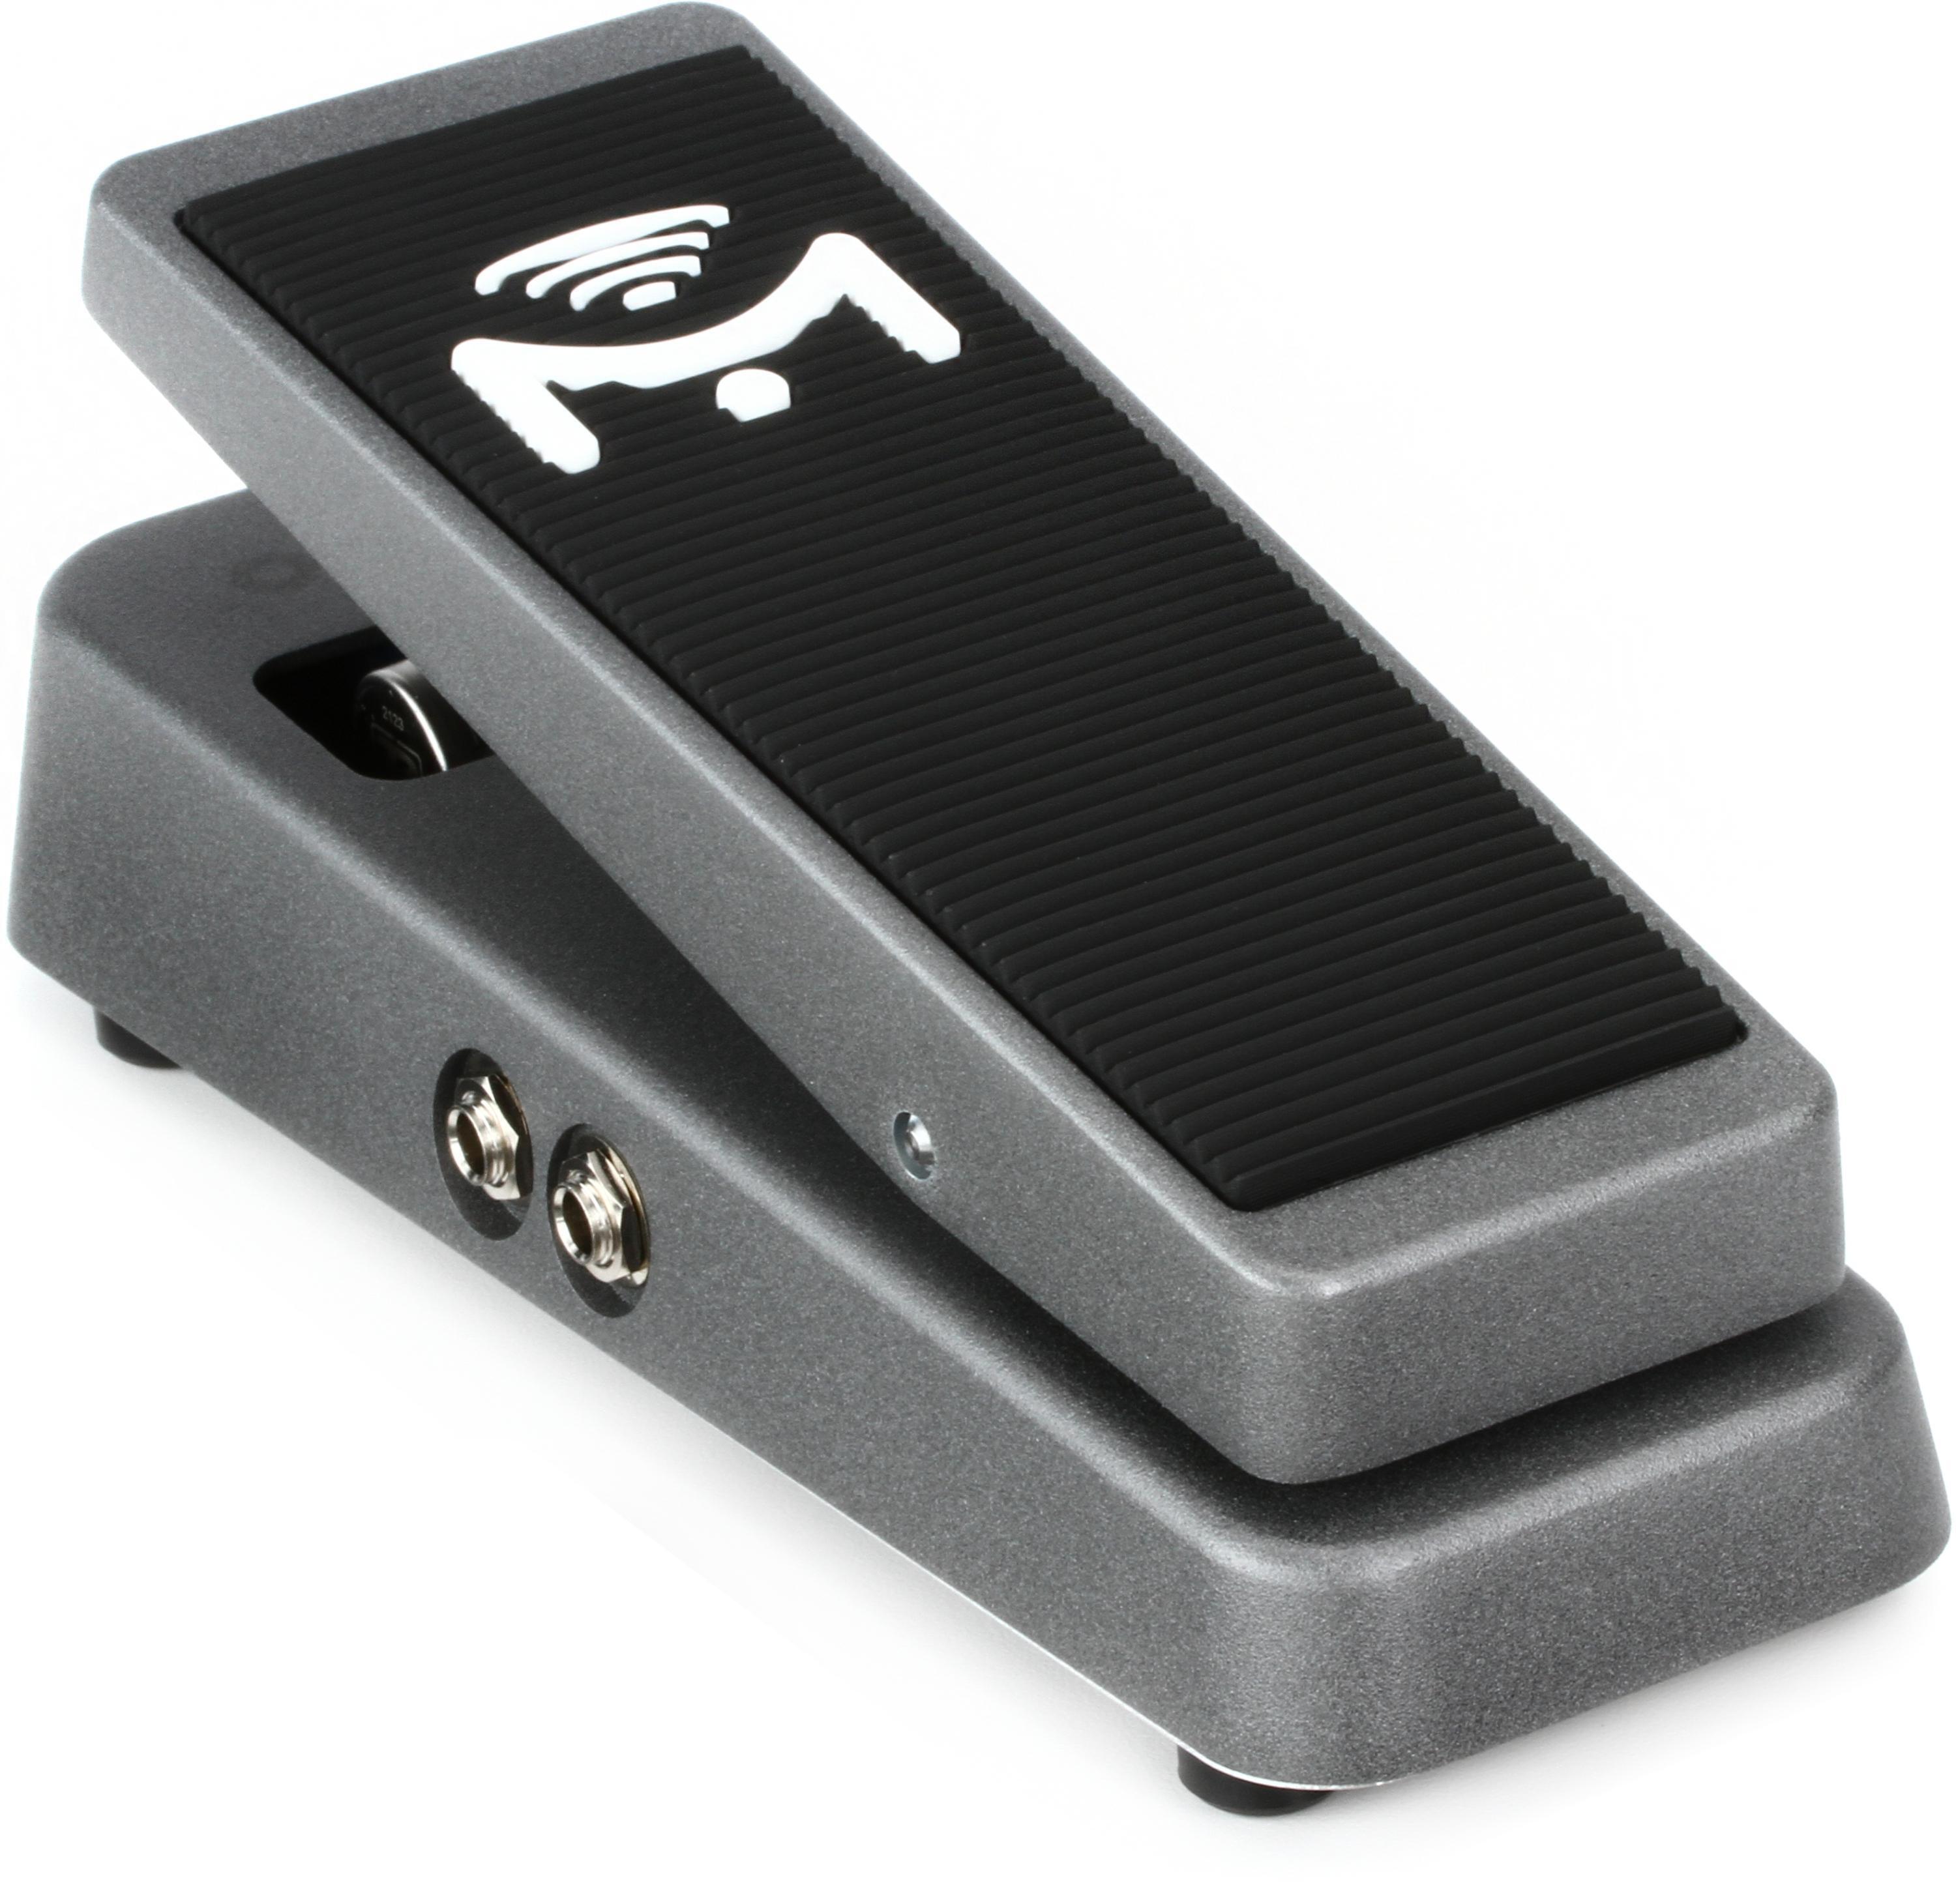 Line 6 EX-1 Expression Pedal | Sweetwater